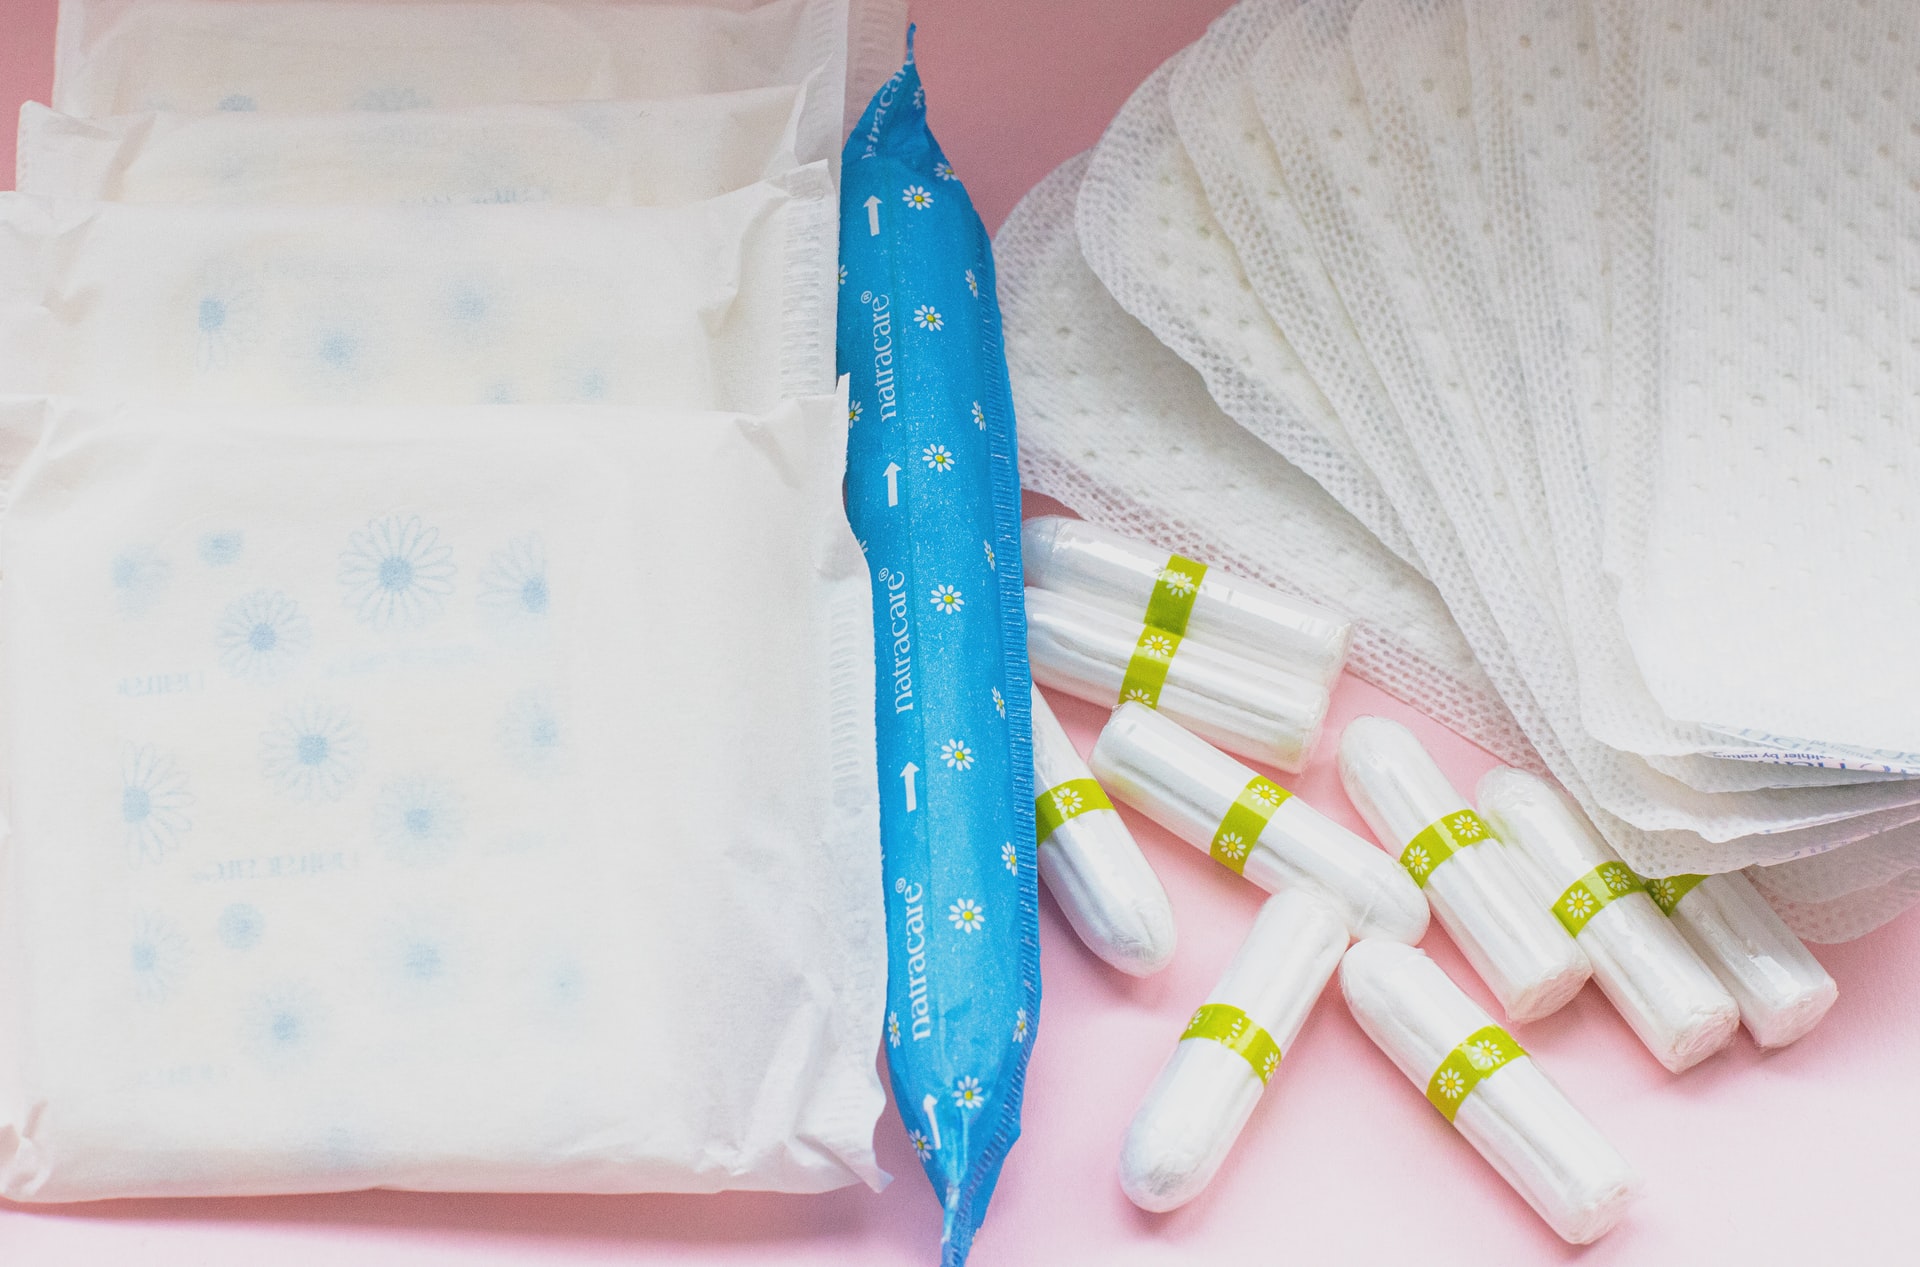 menstrual products displayed on a pink background